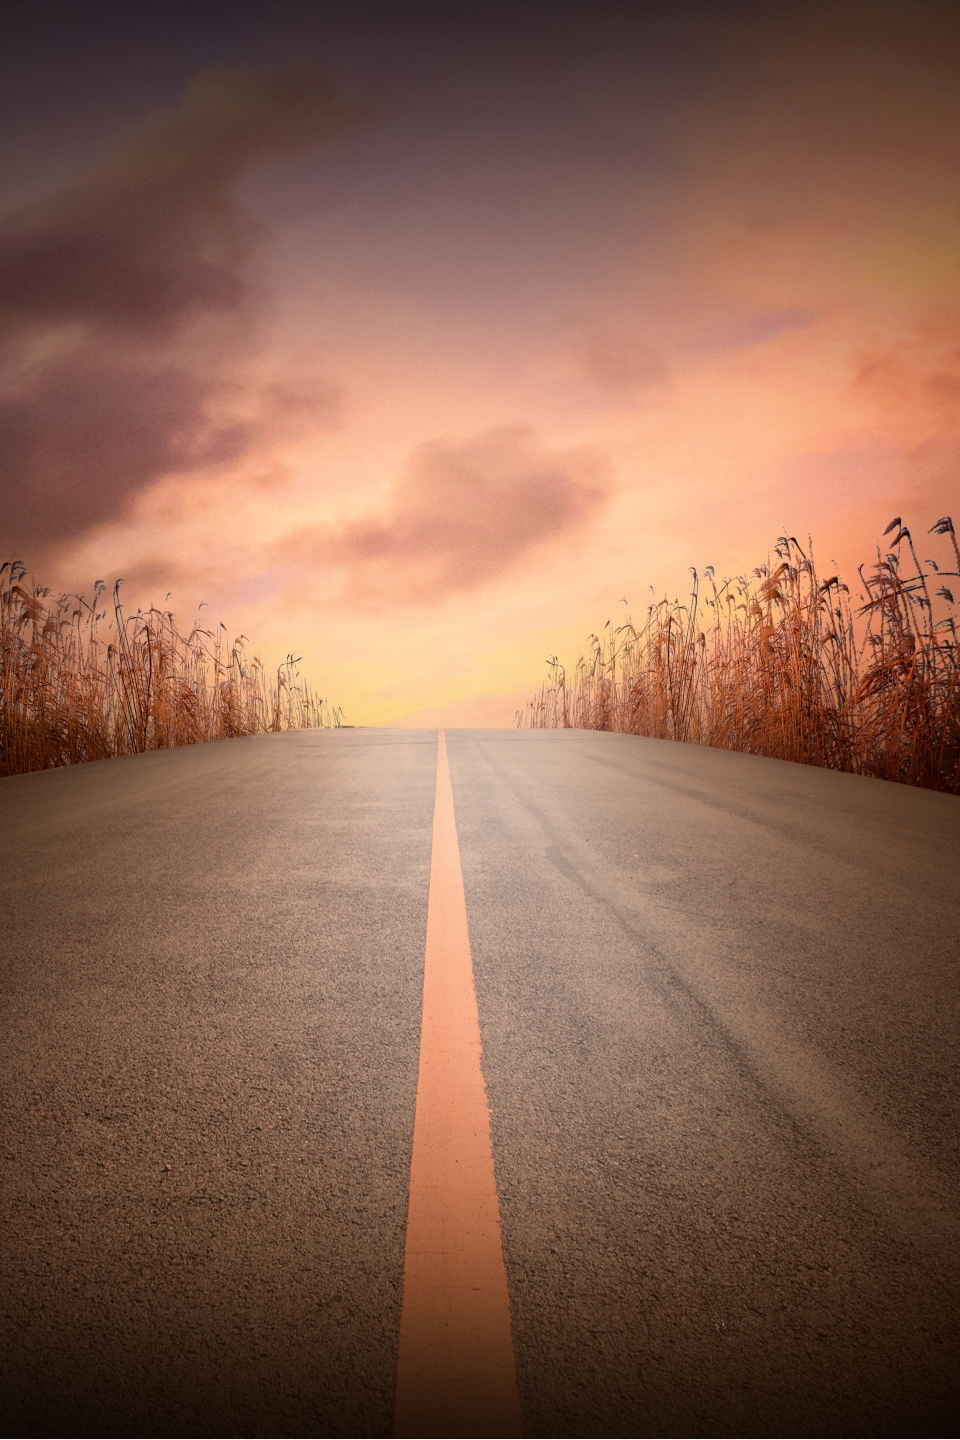 pngtree-highway-composite-background-in-the-sunset-image_262305